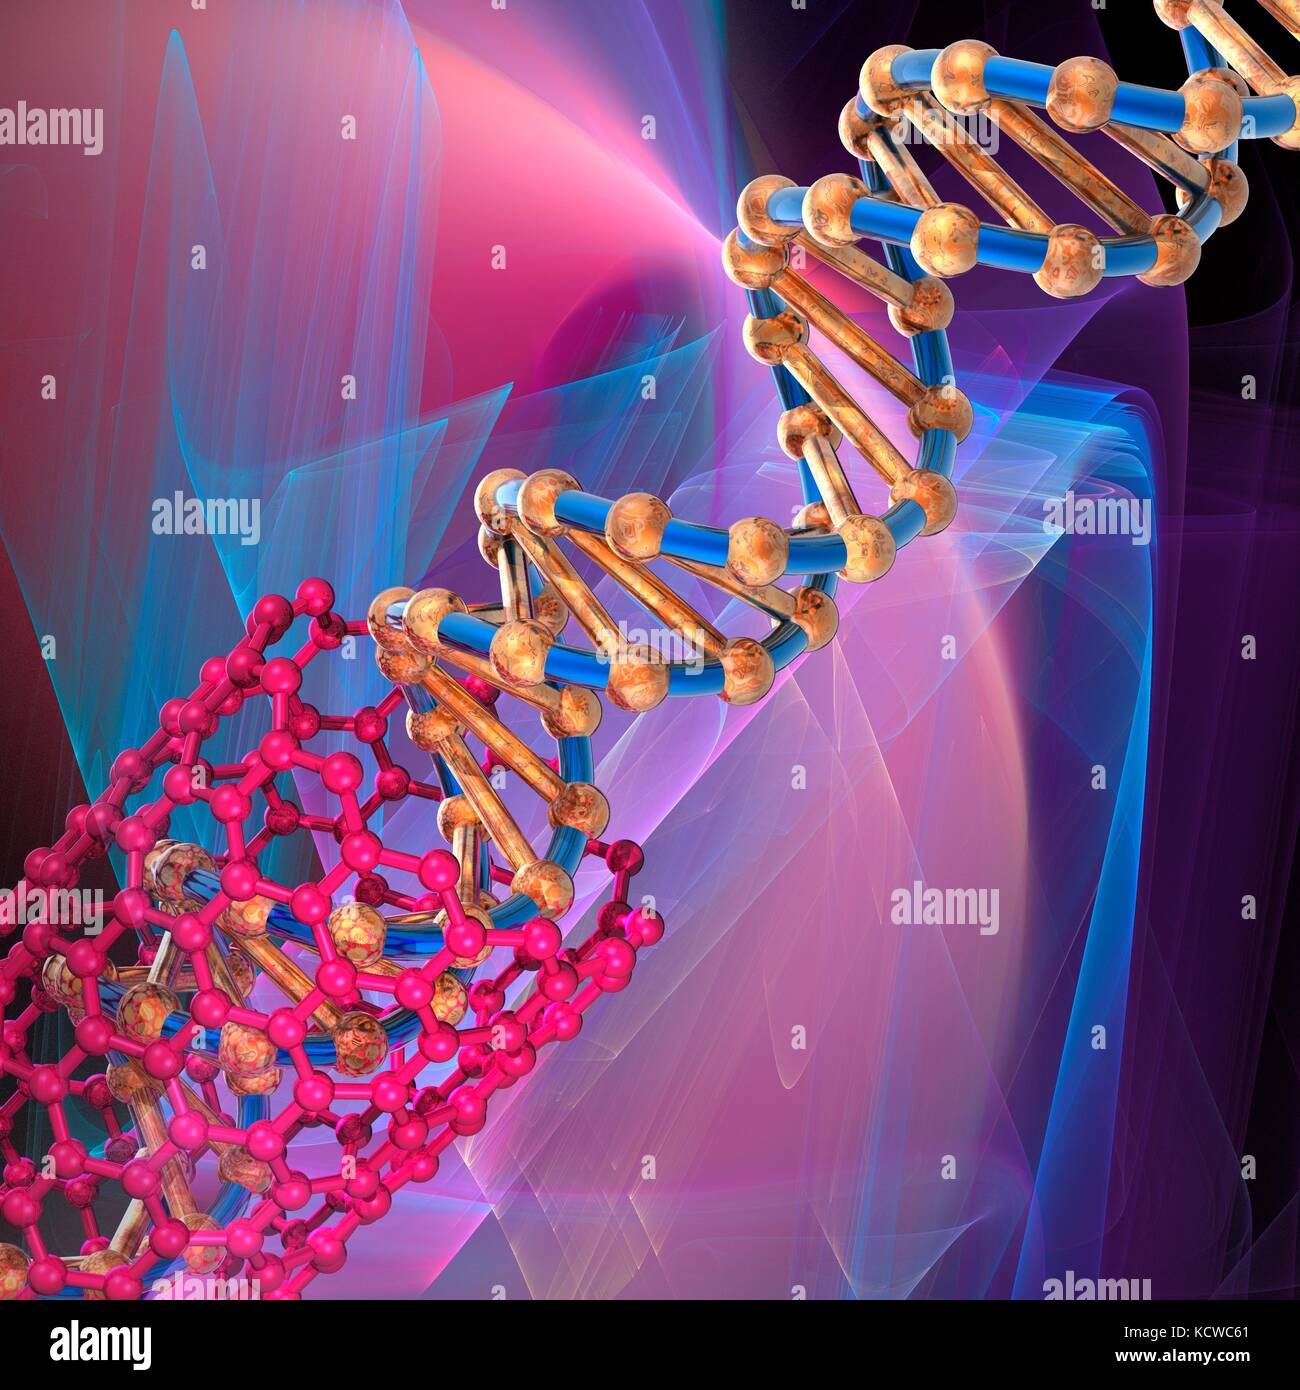 Conceptual illustration of a double stranded DNA (deoxyribonucleic acid) molecule coming out of a nanotube (not drawn to scale). DNA is composed of two strands twisted into a double helix. Each strand consists of a sugar-phosphate backbone attached to nucleotide bases. There are four bases: adenine, cytosine, guanine and thymine. The bases are joined together by hydrogen bonds. DNA contains sections called genes that encode the body's genetic information. Stock Photo